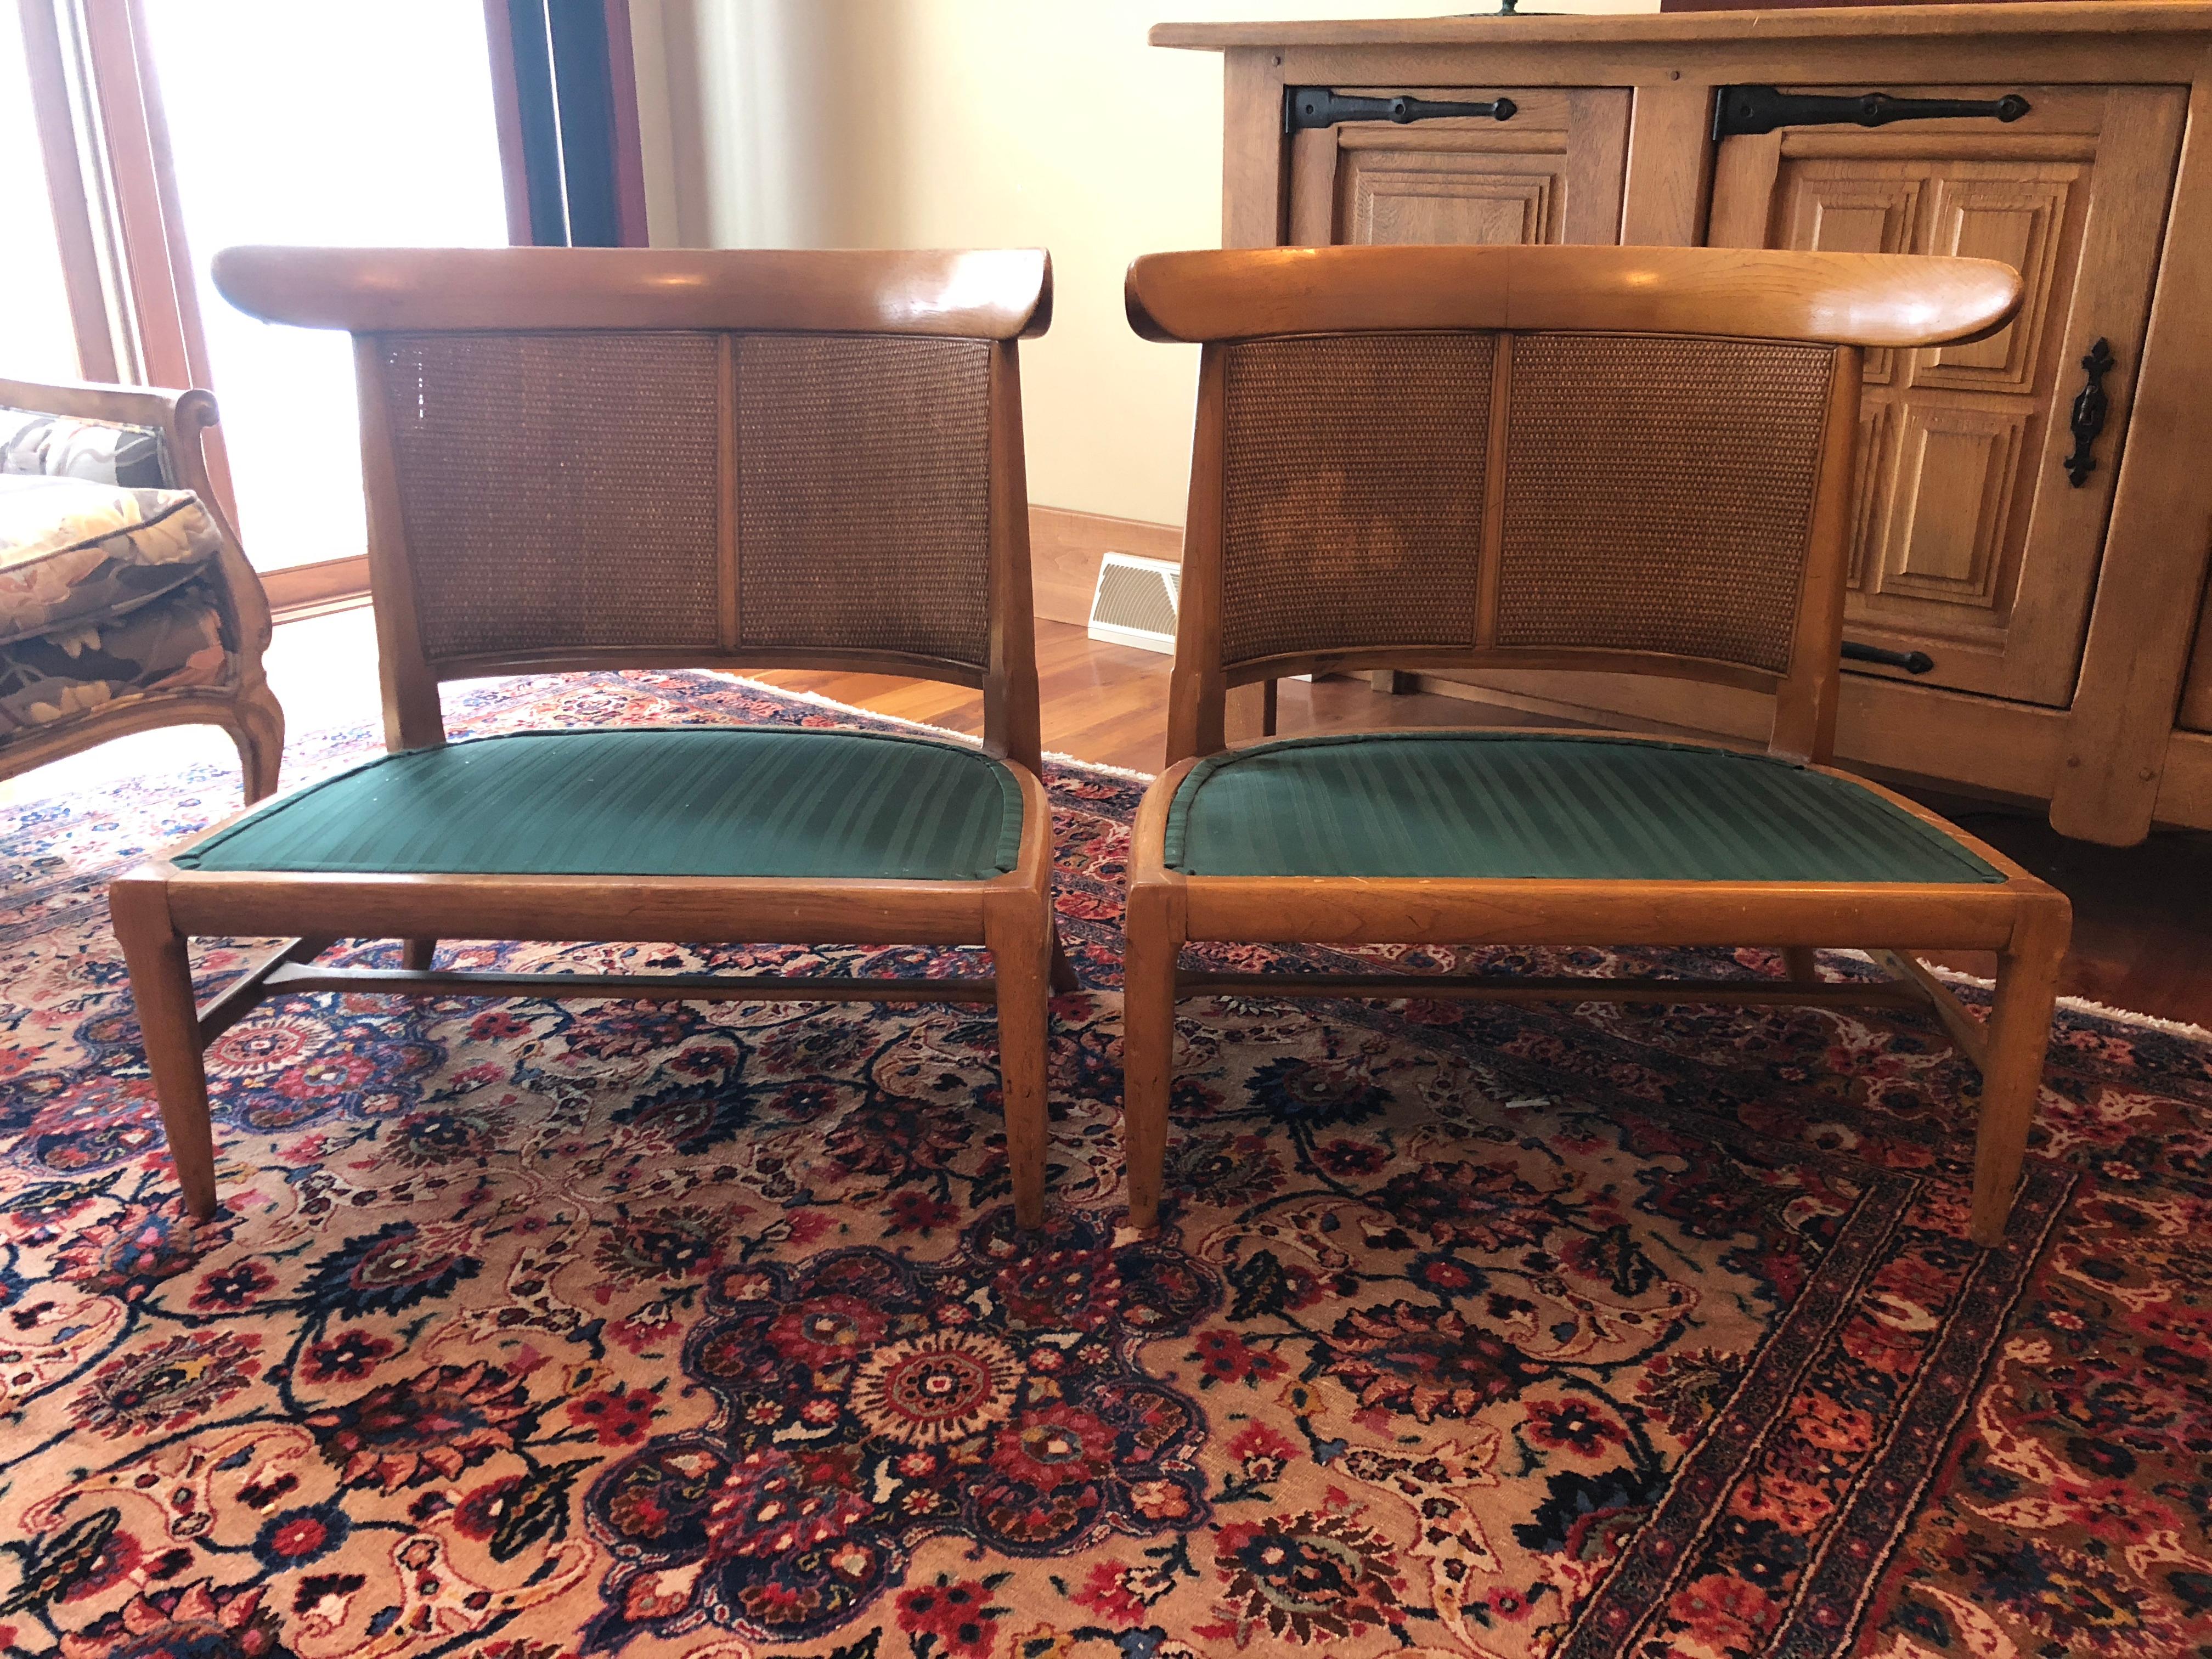 A stunning pair of Tomlinson chairs in good condition. Some wear to the wood and refinishing required.

Cushions are not included.